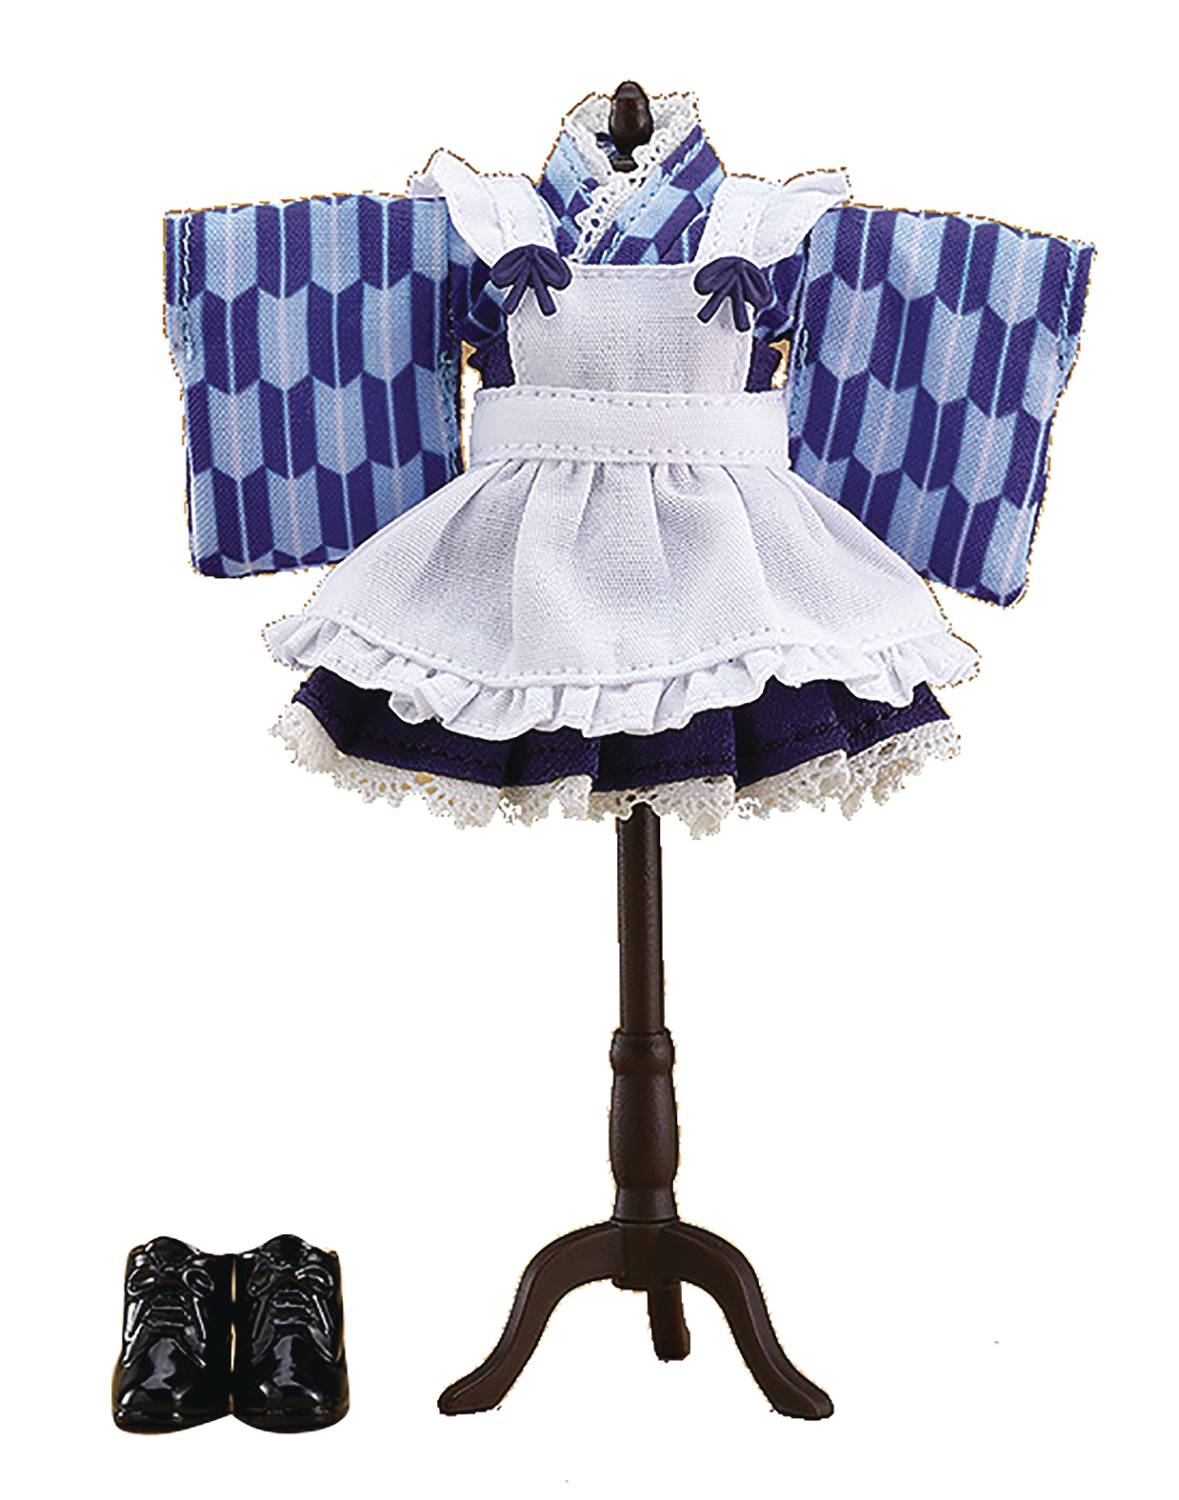 NENDOROID DOLL OUTFIT SET JAPANESE STYLE MAID BLUE VER